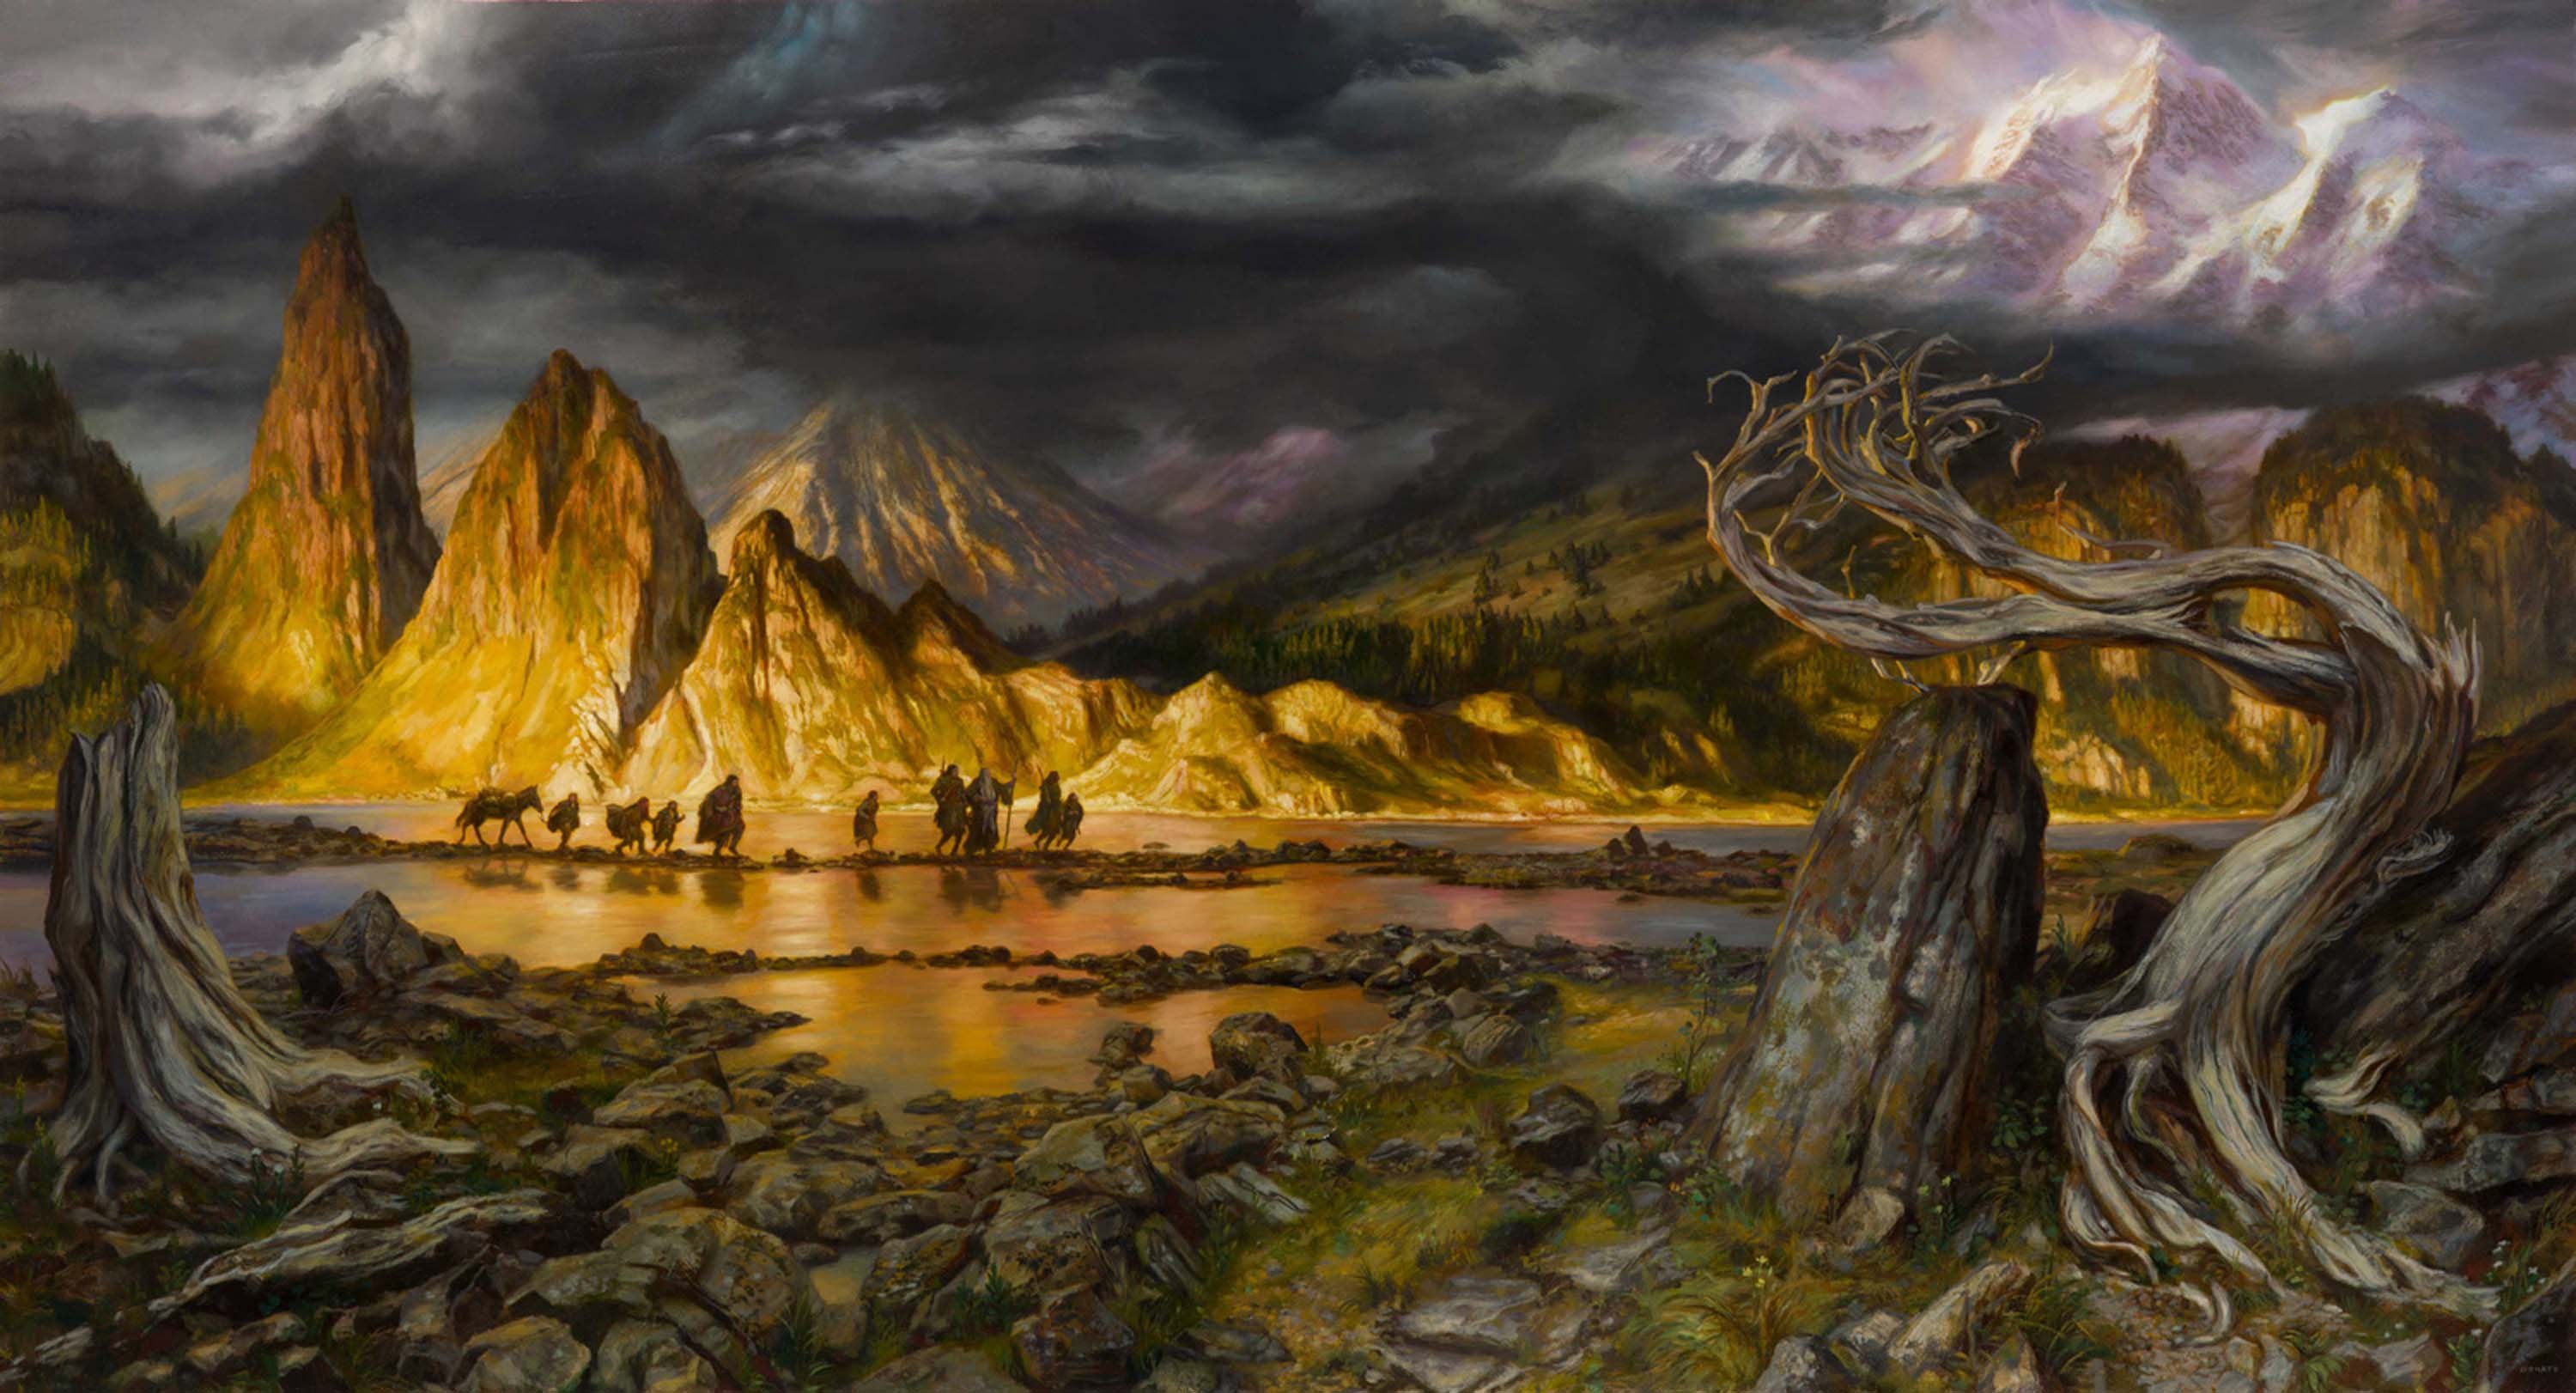 The Fellowship in Hollin
35" x 66"  Oil on Panel 2017
'only the stones remember the elves now.'
private collection